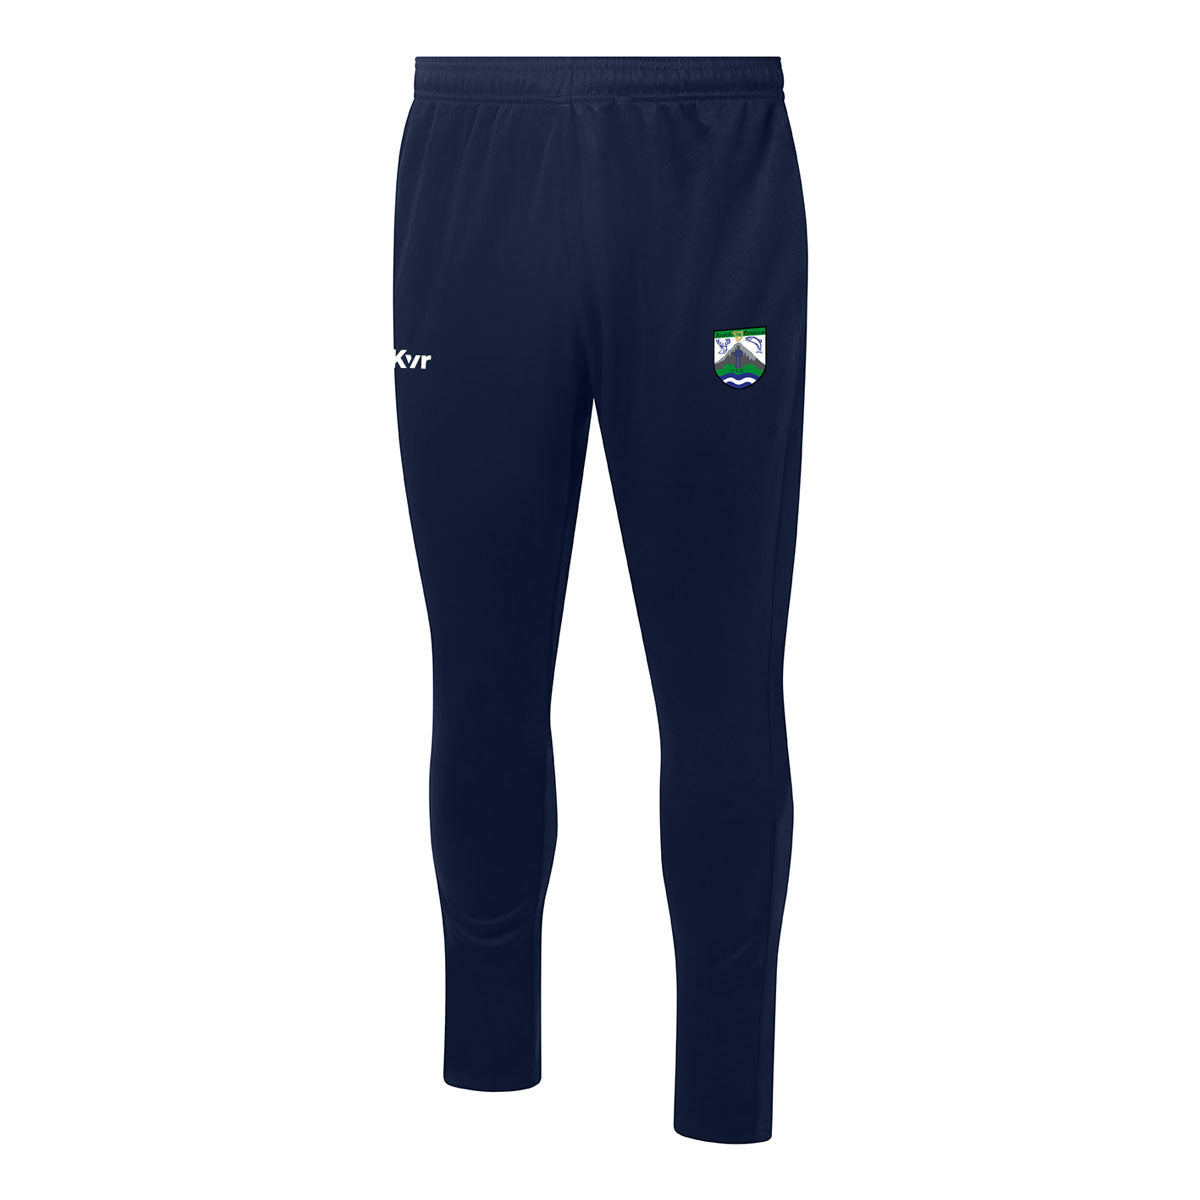 Mc Keever CLG Ghaoth Dobhair Core 22 Skinny Pants - Youth - Navy